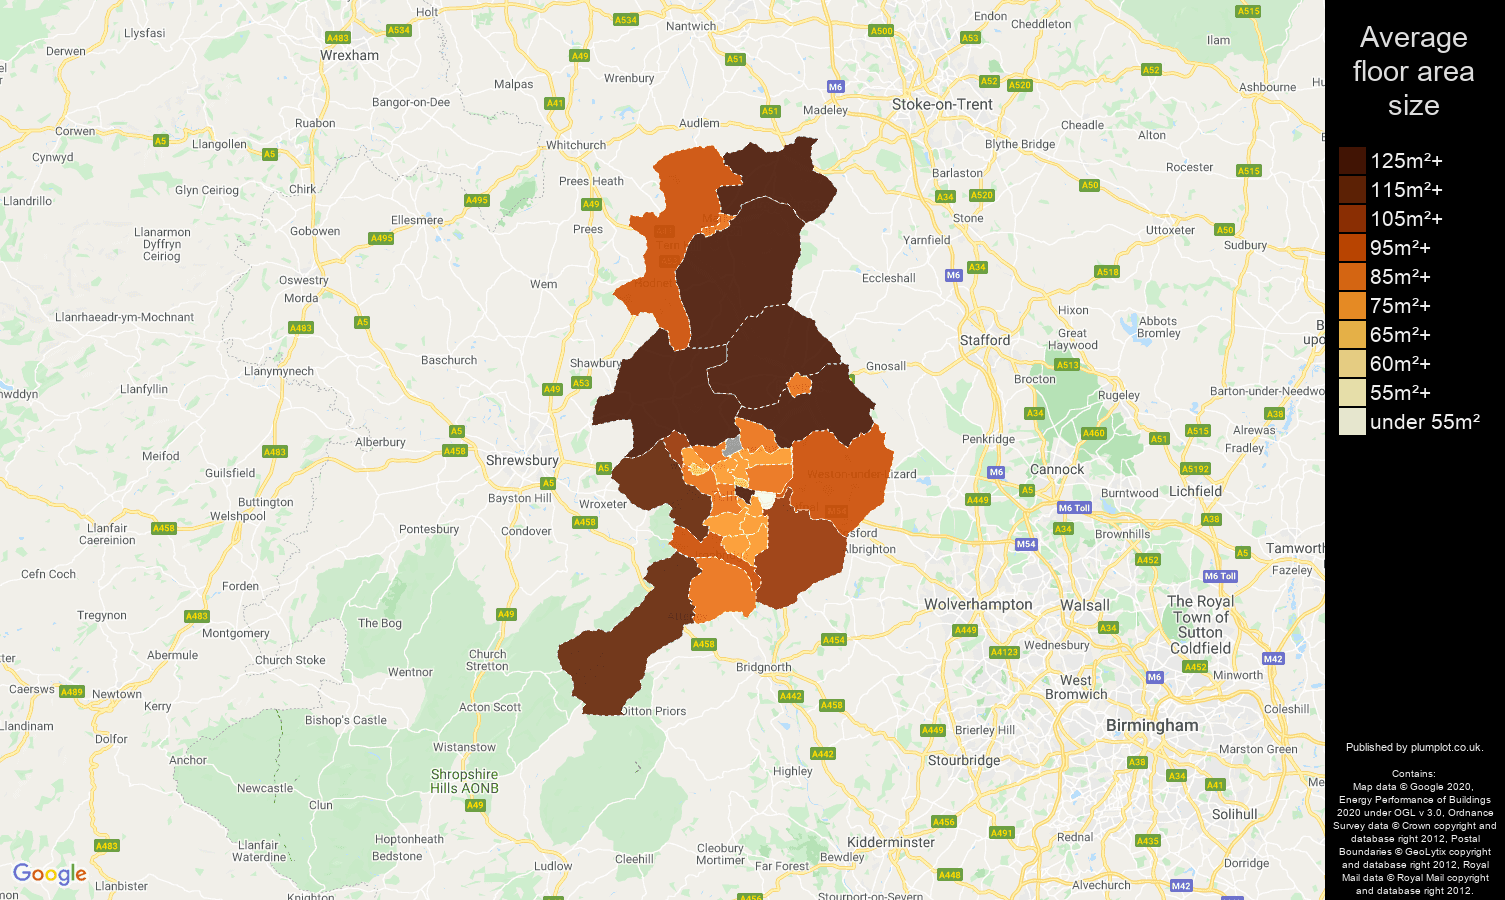 Telford map of average floor area size of properties